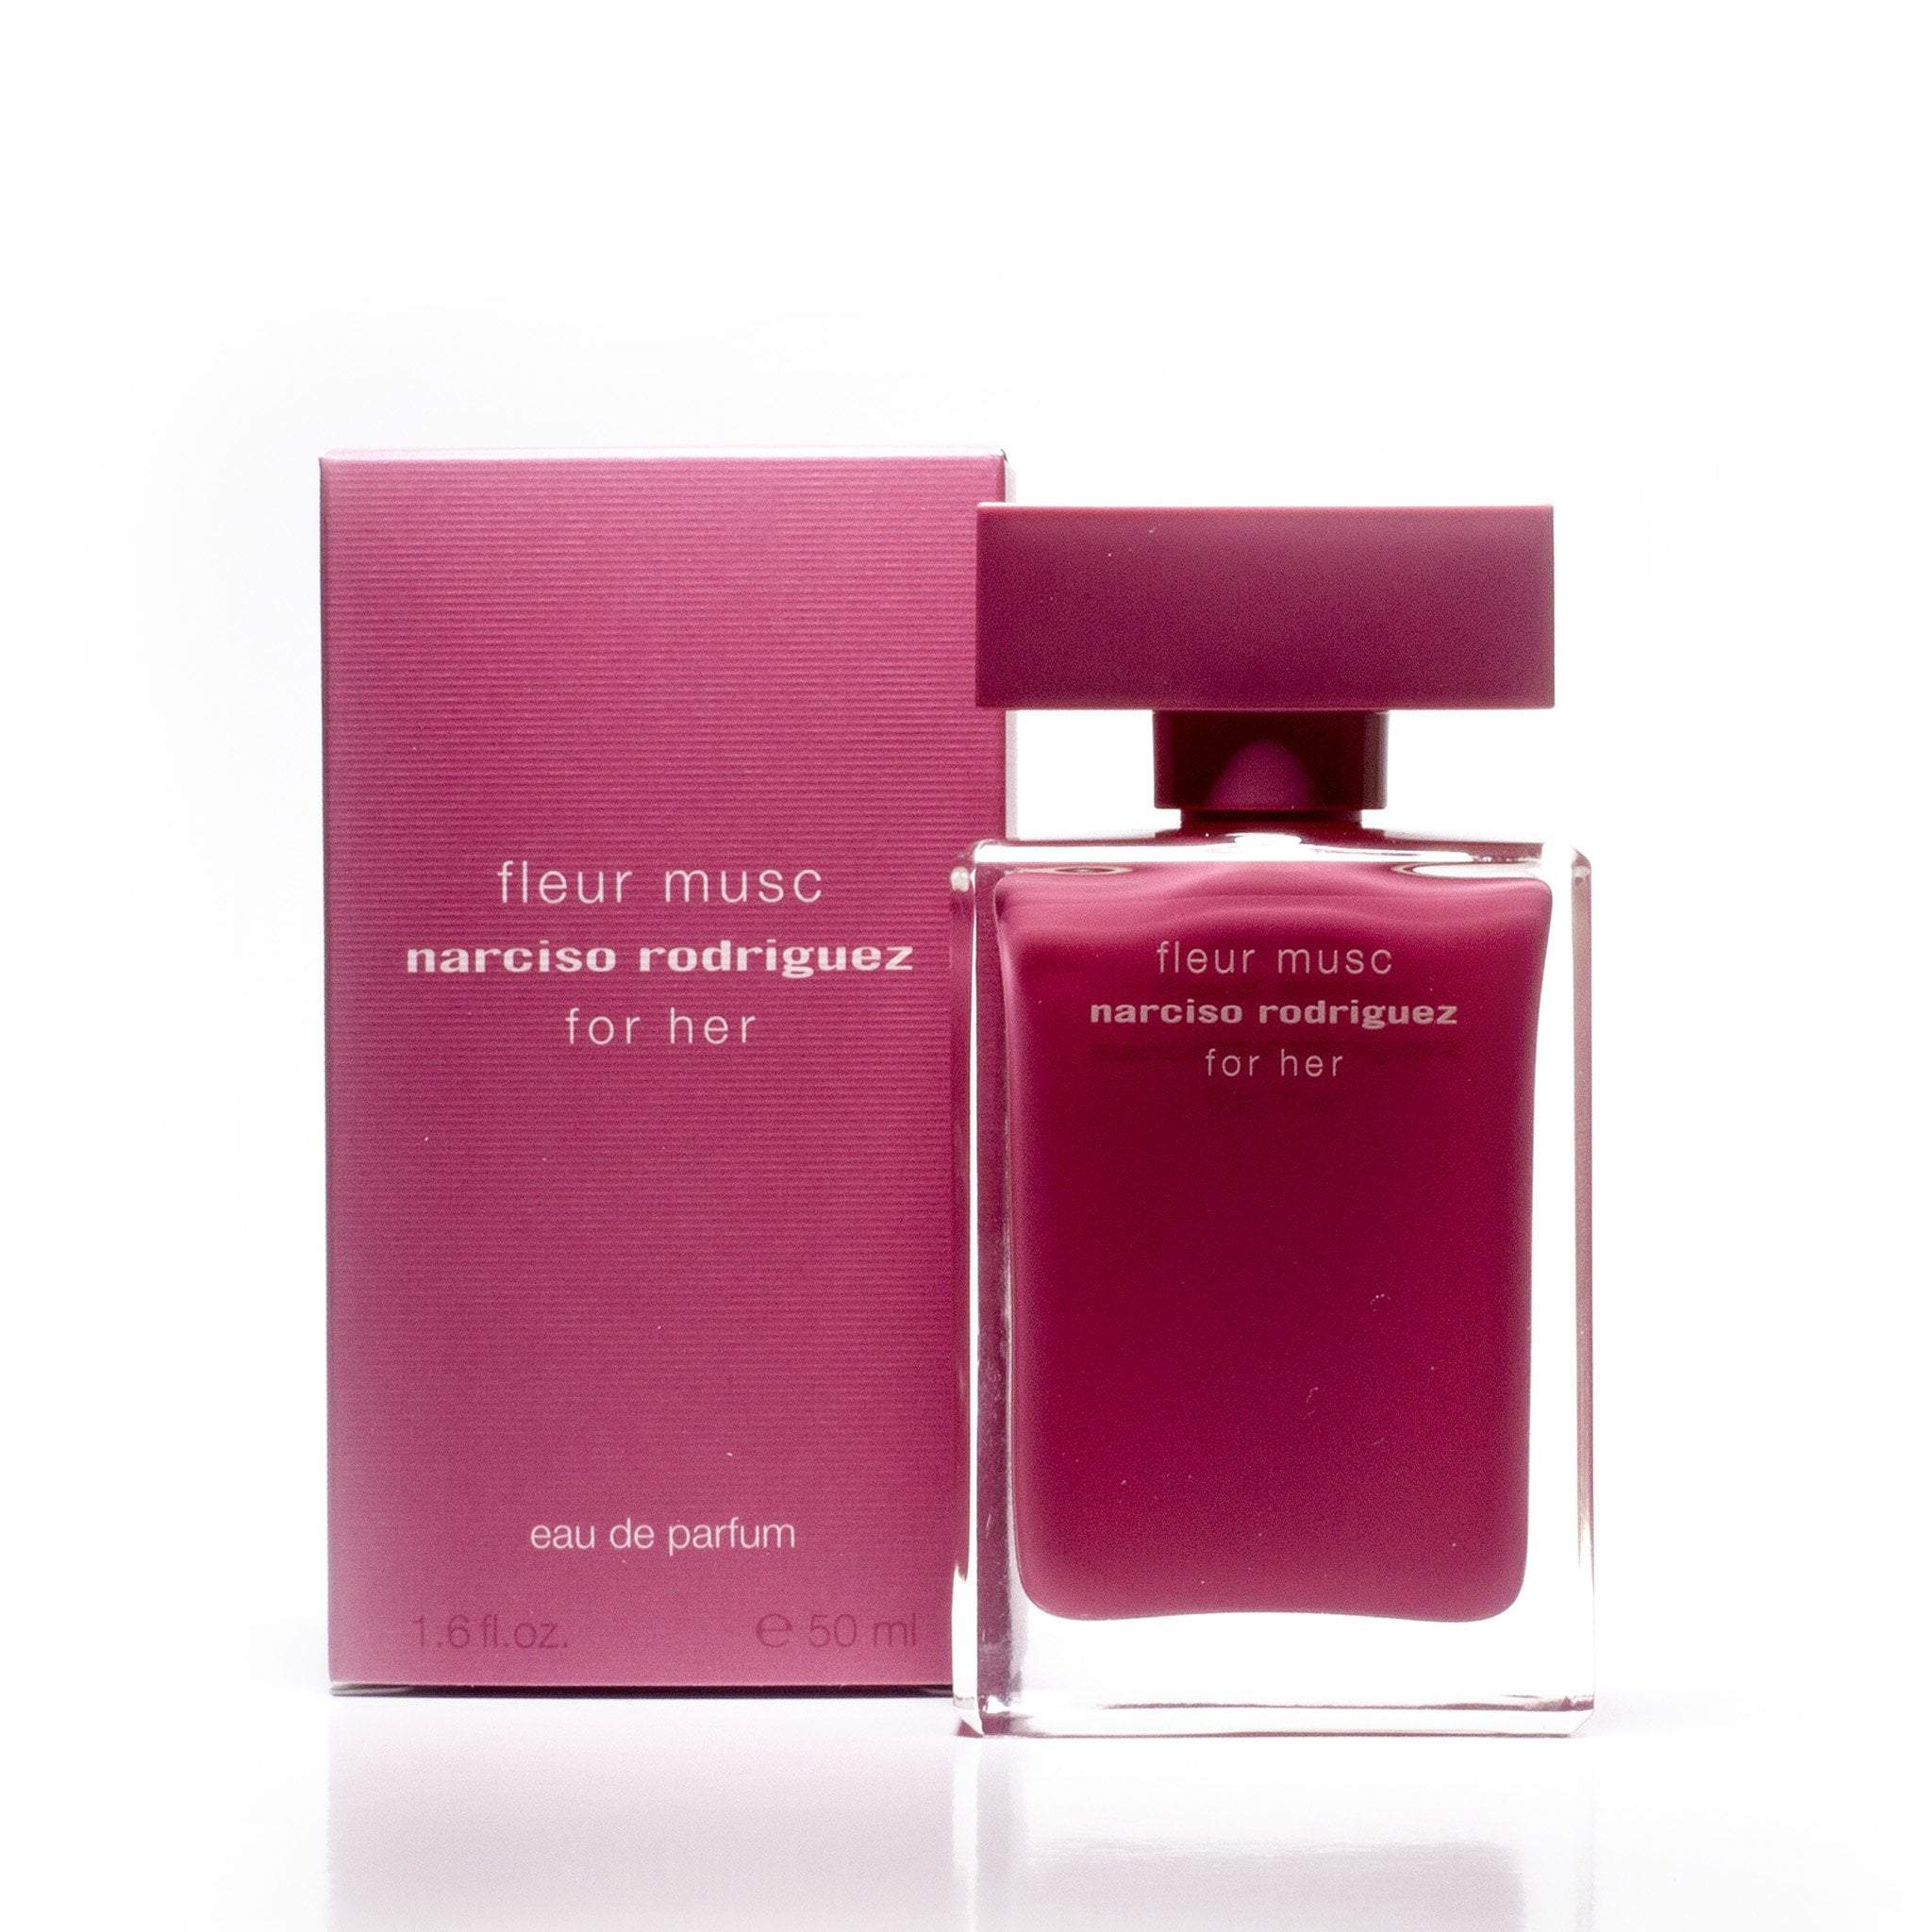 Fleur Musc Narciso Rodriguez for her. Narciso Rodriguez fleur Musc for her Eau de Toilette Florale. Narciso Rodriguez Musc Noir Rose for her. Narciso Rodriguez logo. Narciso rodriguez musc noir rose